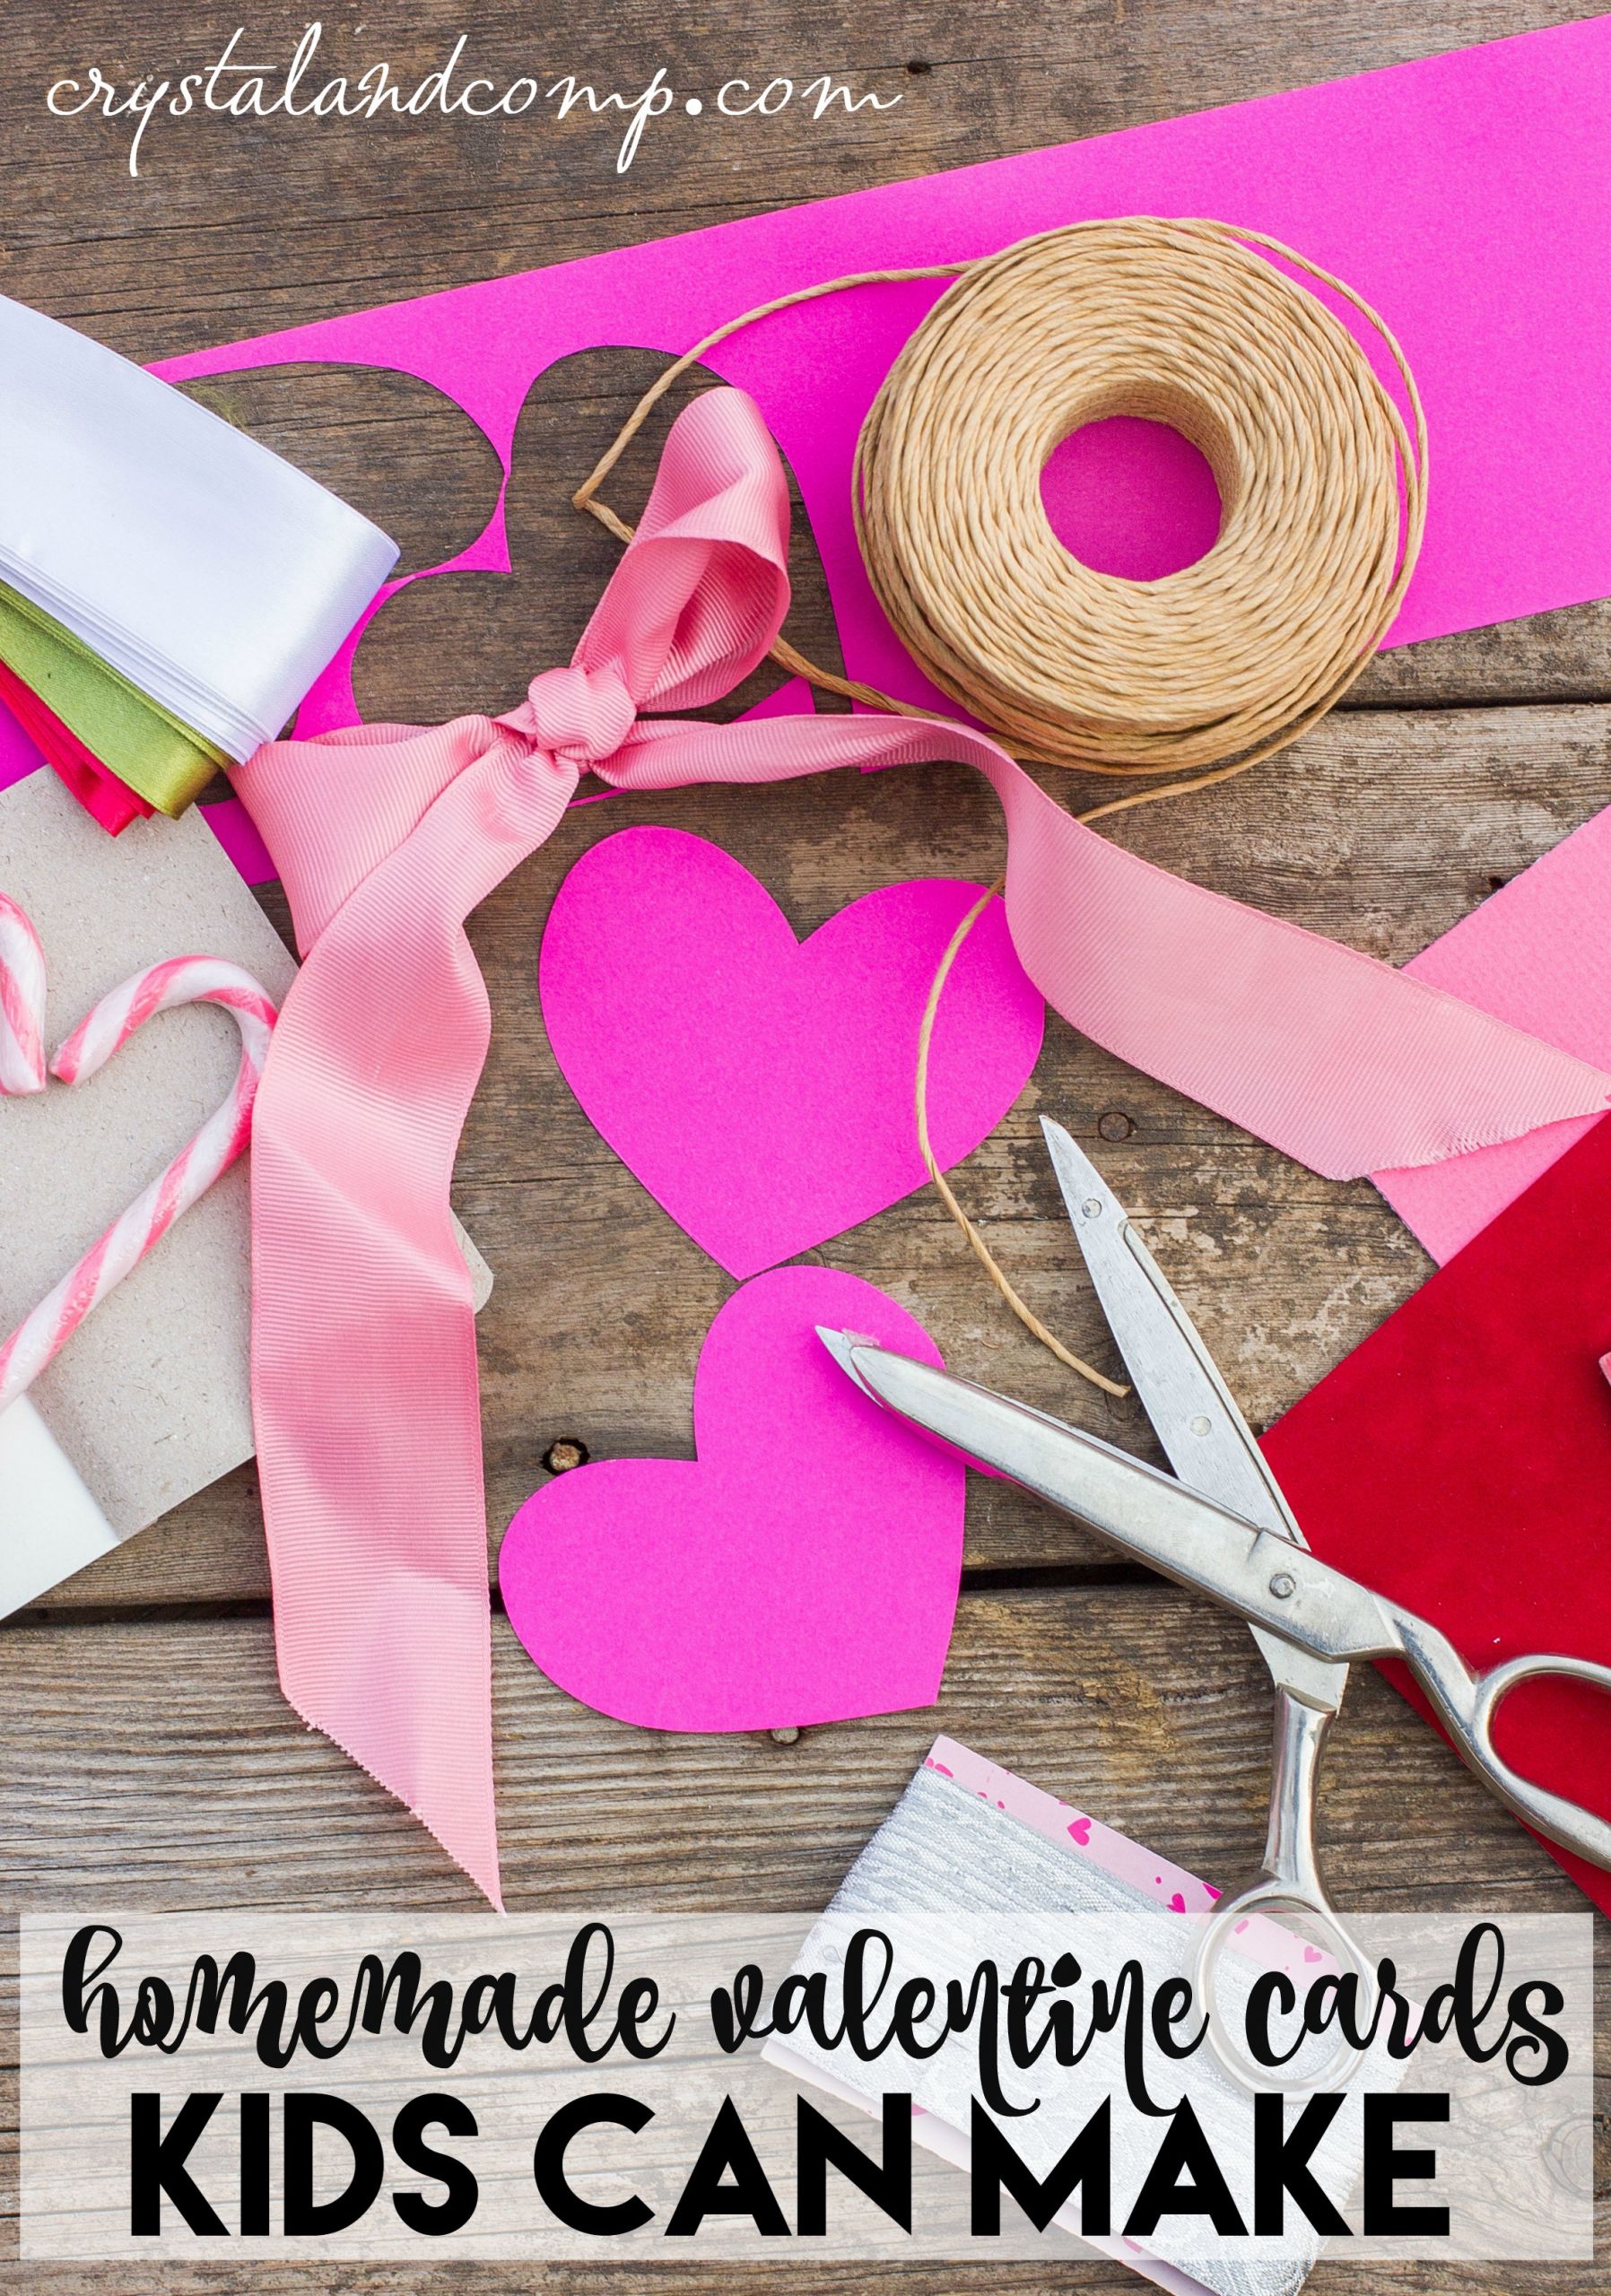 Valentines Day Card Ideas For Kids
 Homemade Valentine Cards for Kids